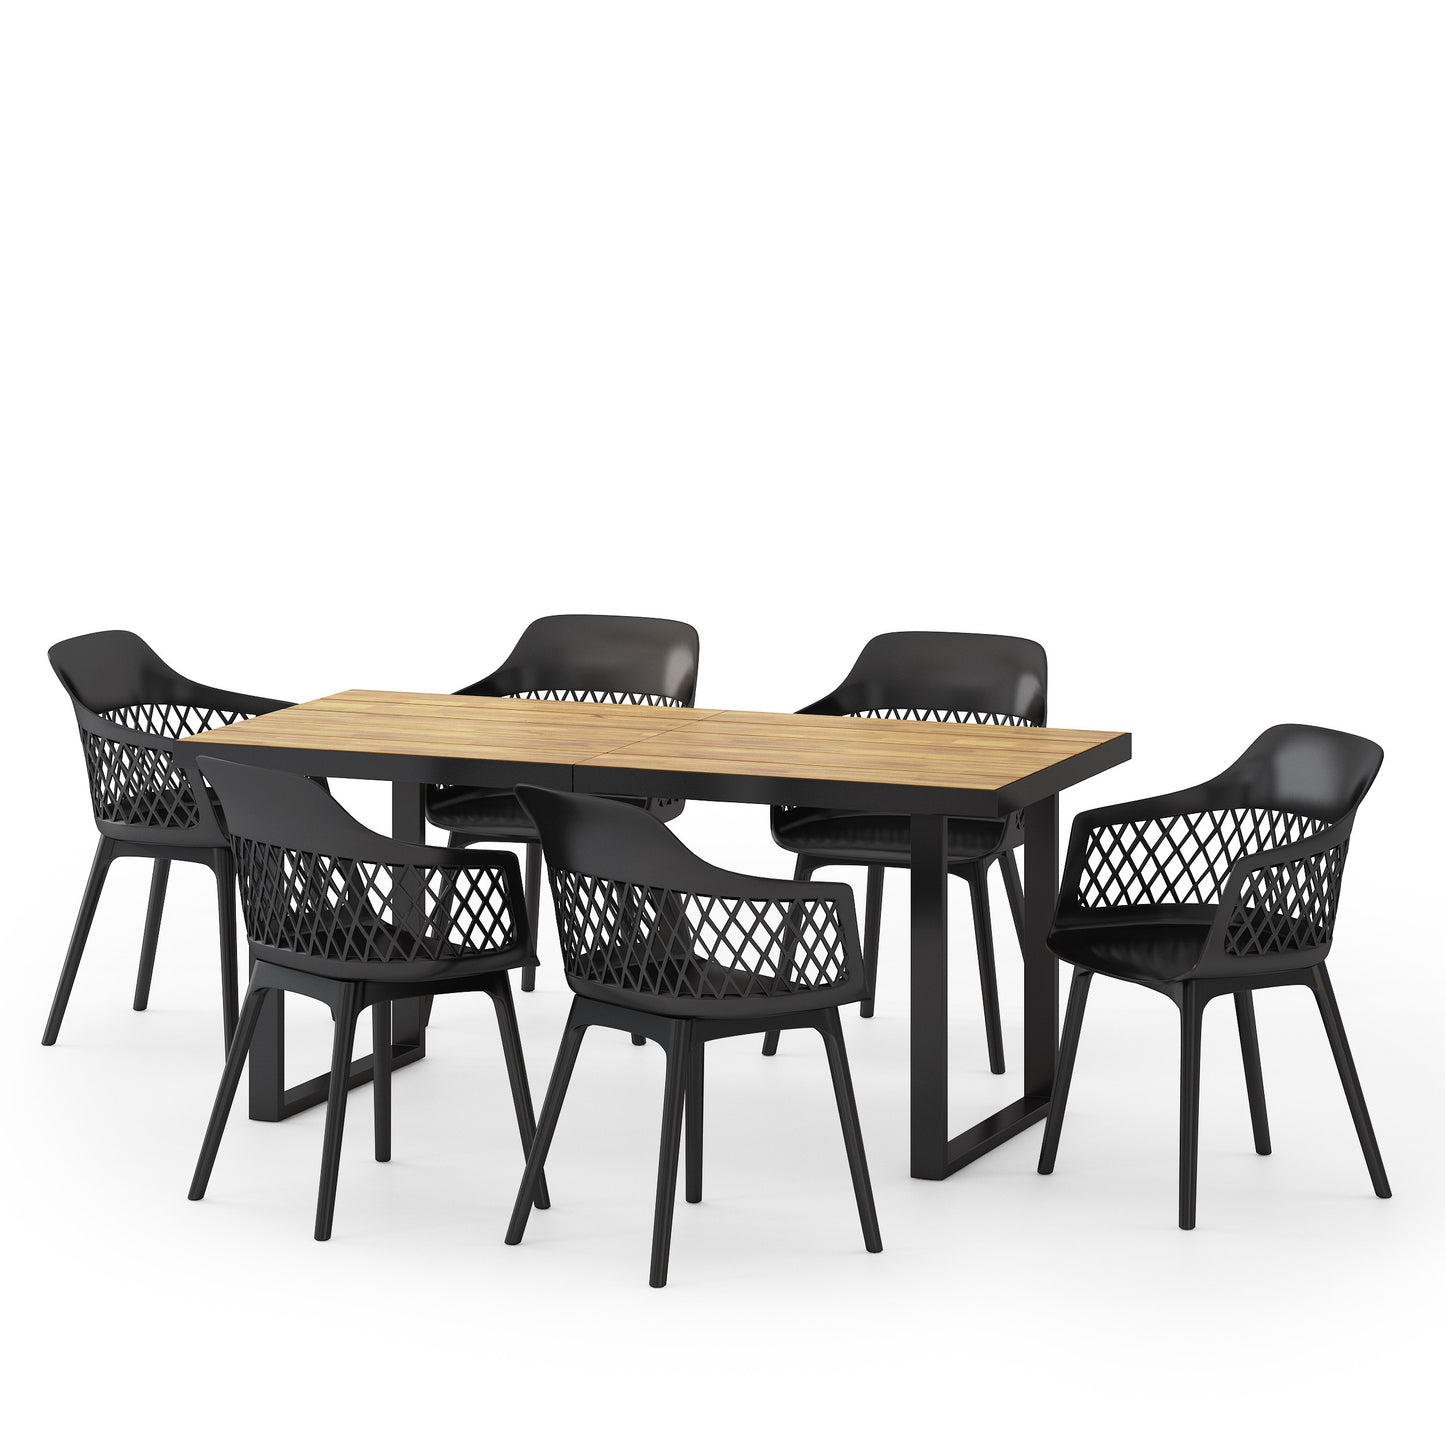 Roma Outdoor Wood and Resin 7 Piece Dining Set, Black and Teak